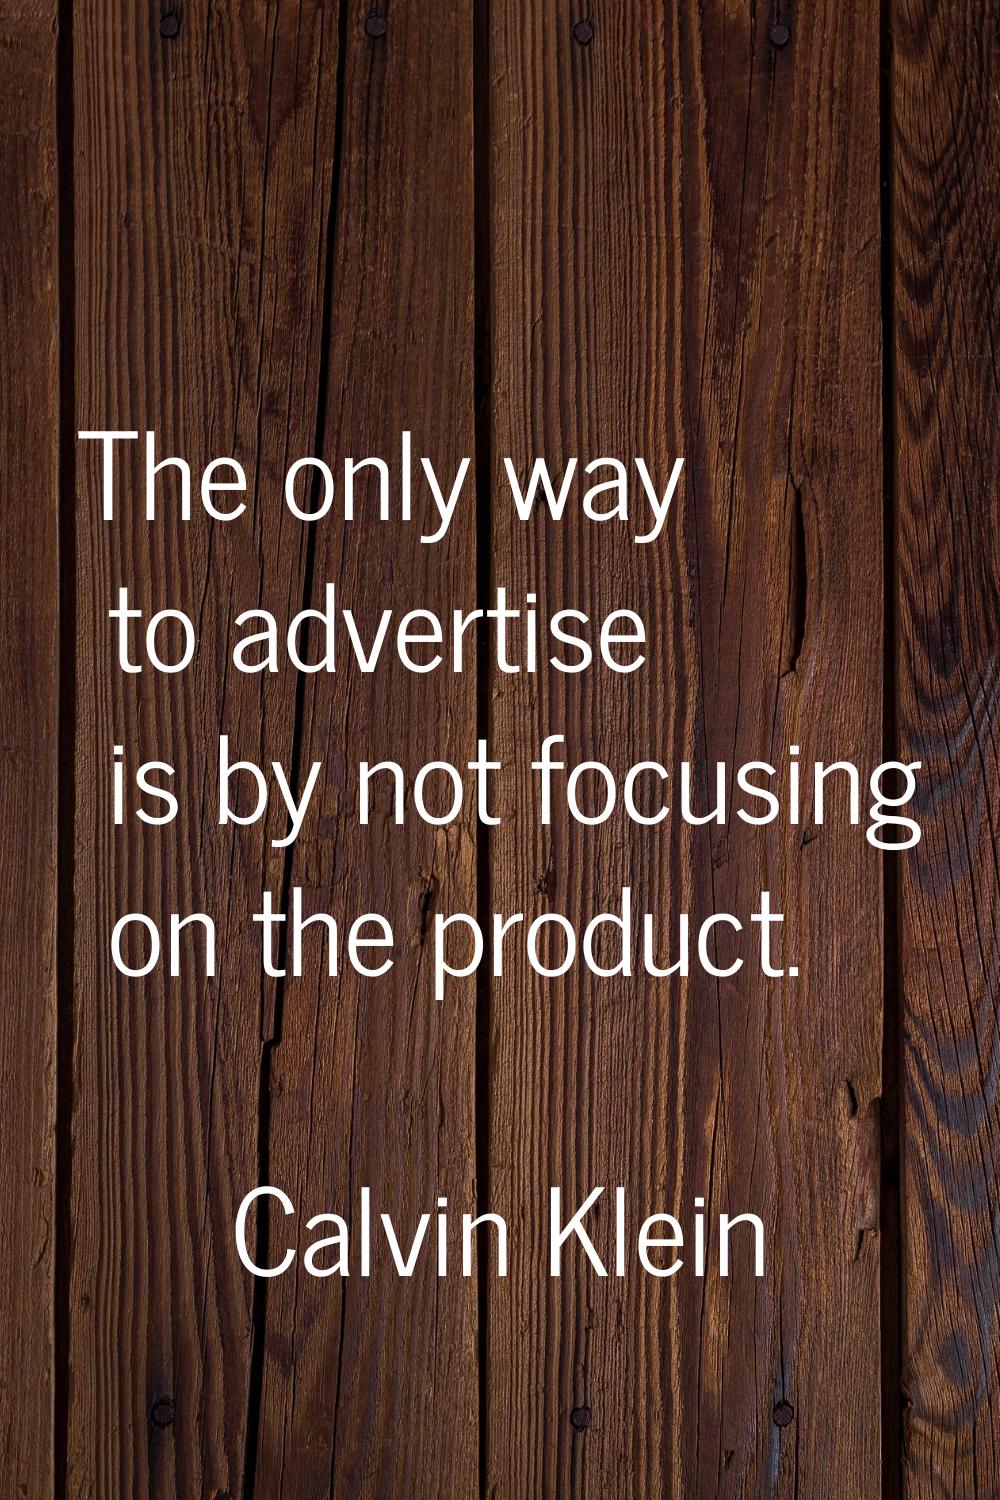 The only way to advertise is by not focusing on the product.